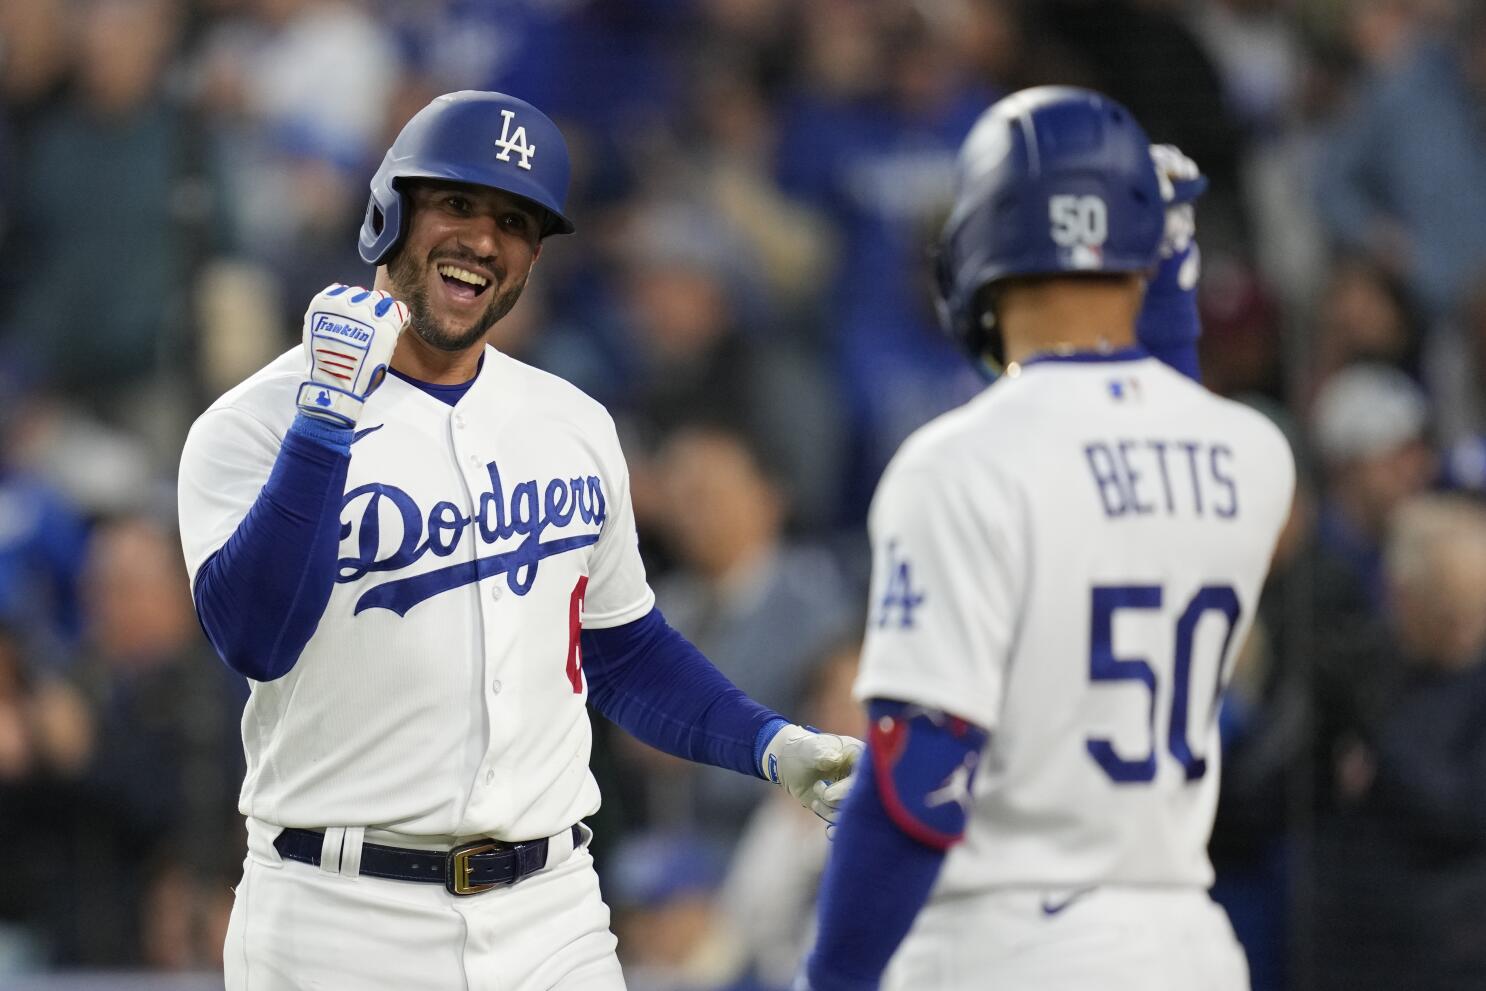 Watch: Mookie Betts smashes two homers during Dodgers' win - Los